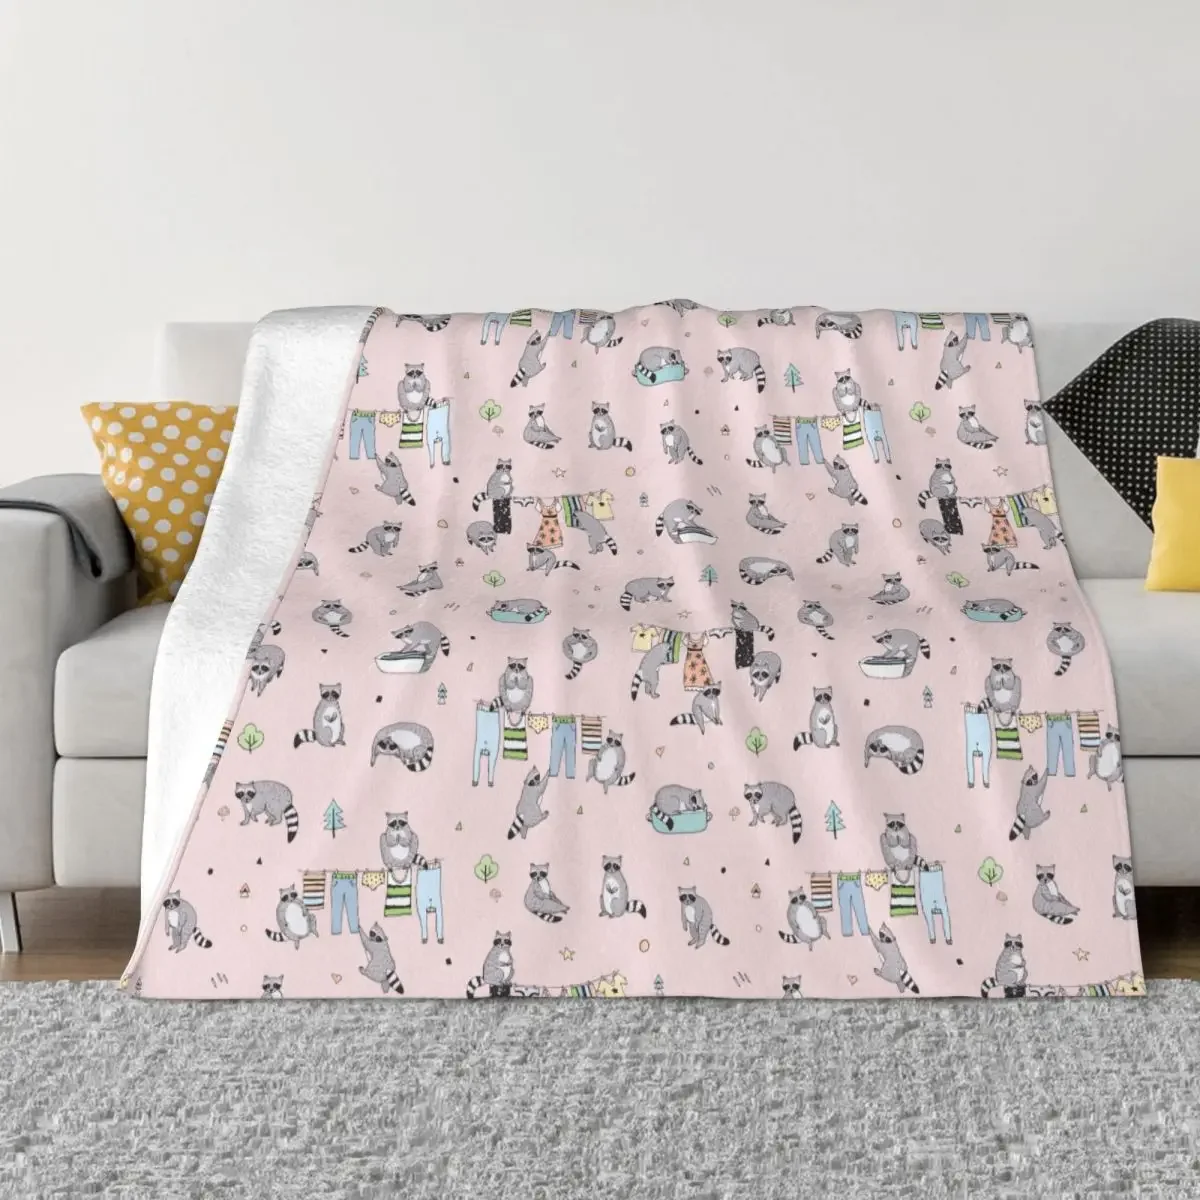 

Funny Raccoon Blankets Fleece Textile Decor Pink Multifunction Warm Throw Blankets for Bed Couch Bedspread